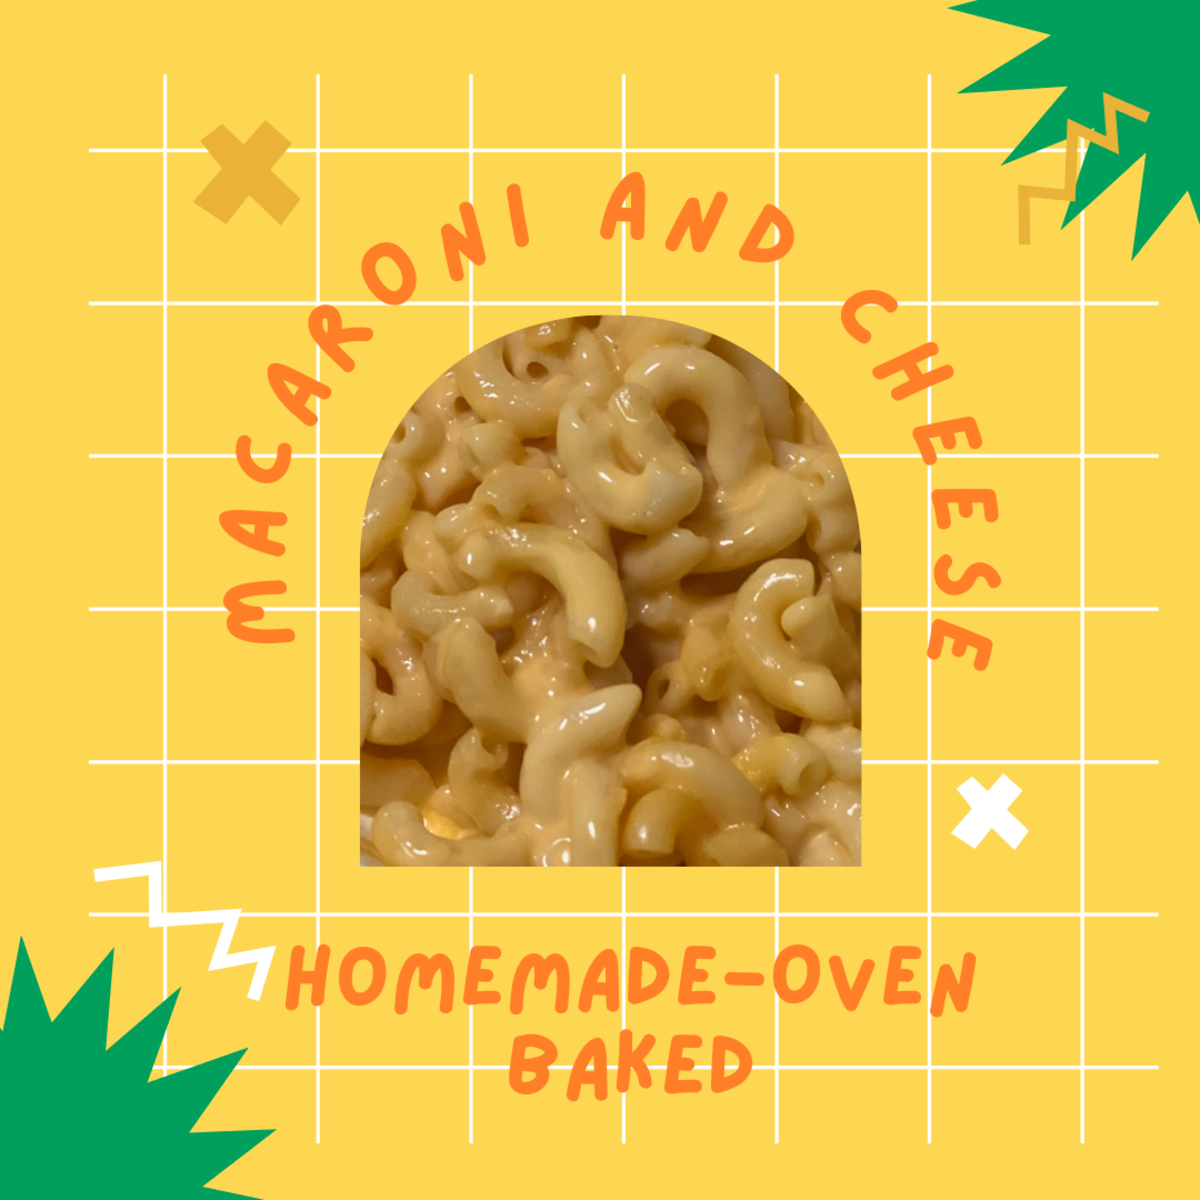 Absolute Best Homemade Oven-Baked Macaroni and Cheese!